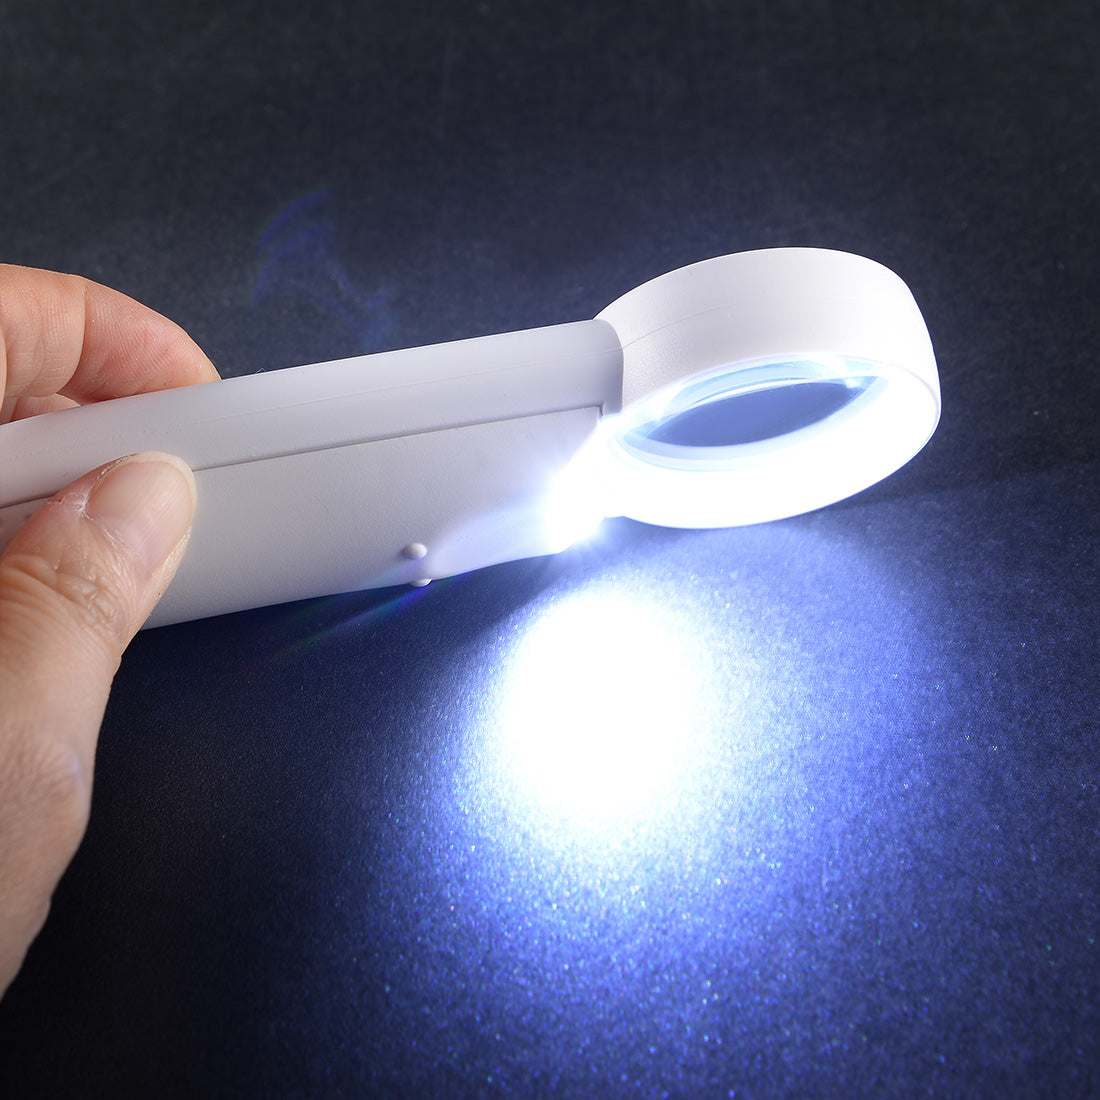 uxcell Uxcell 15X LED Illuminated Handheld Magnifier 1500% Read Loupe w LED light,for Stamps